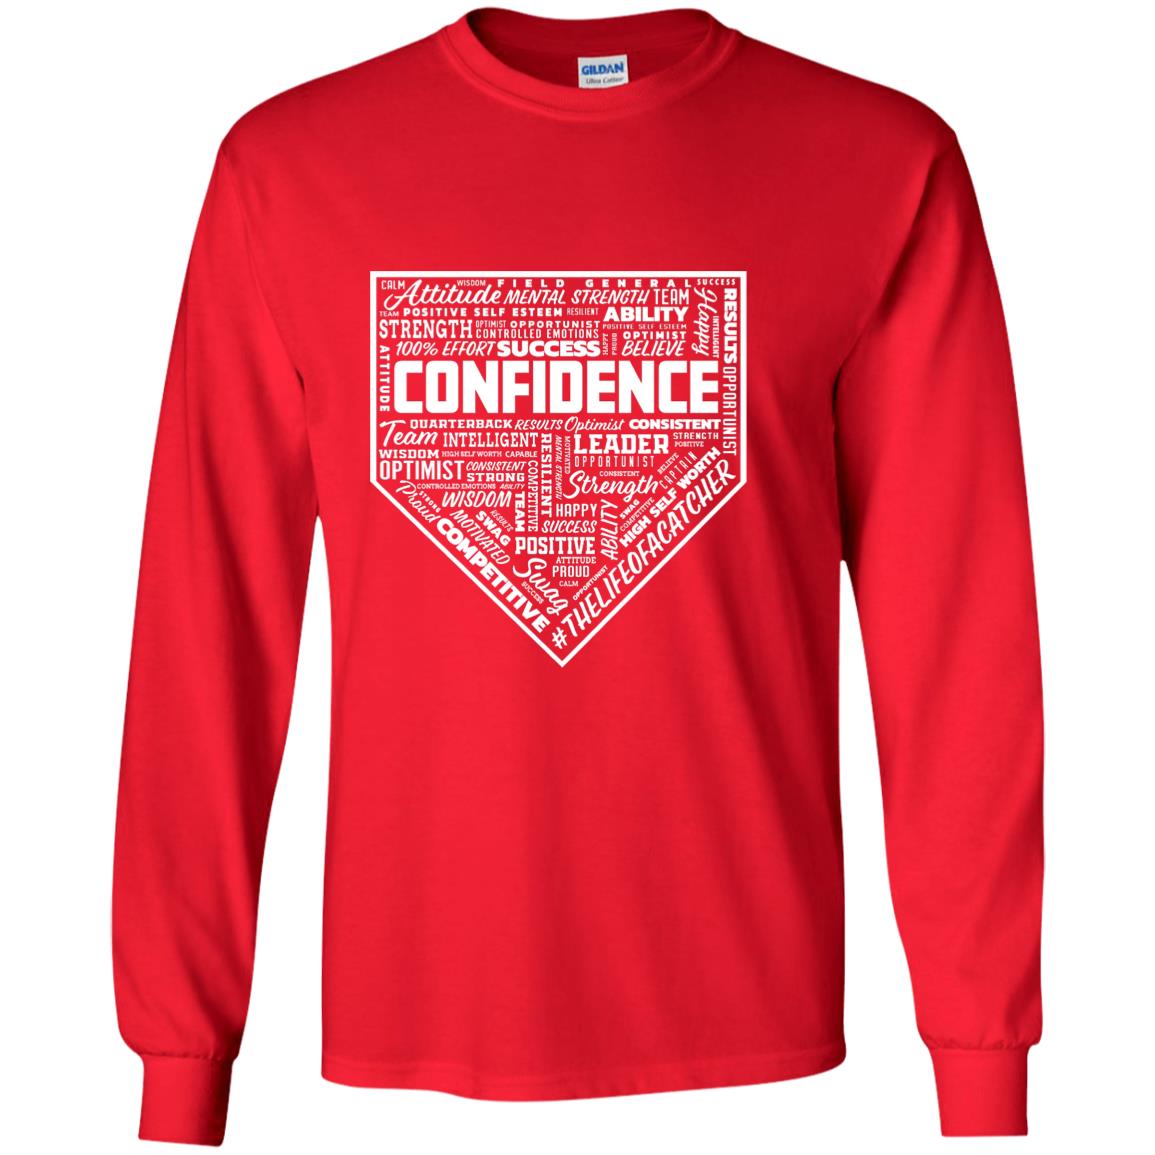 The Catching Guy Catcher Confidence Youth Long Sleeve Tee in red